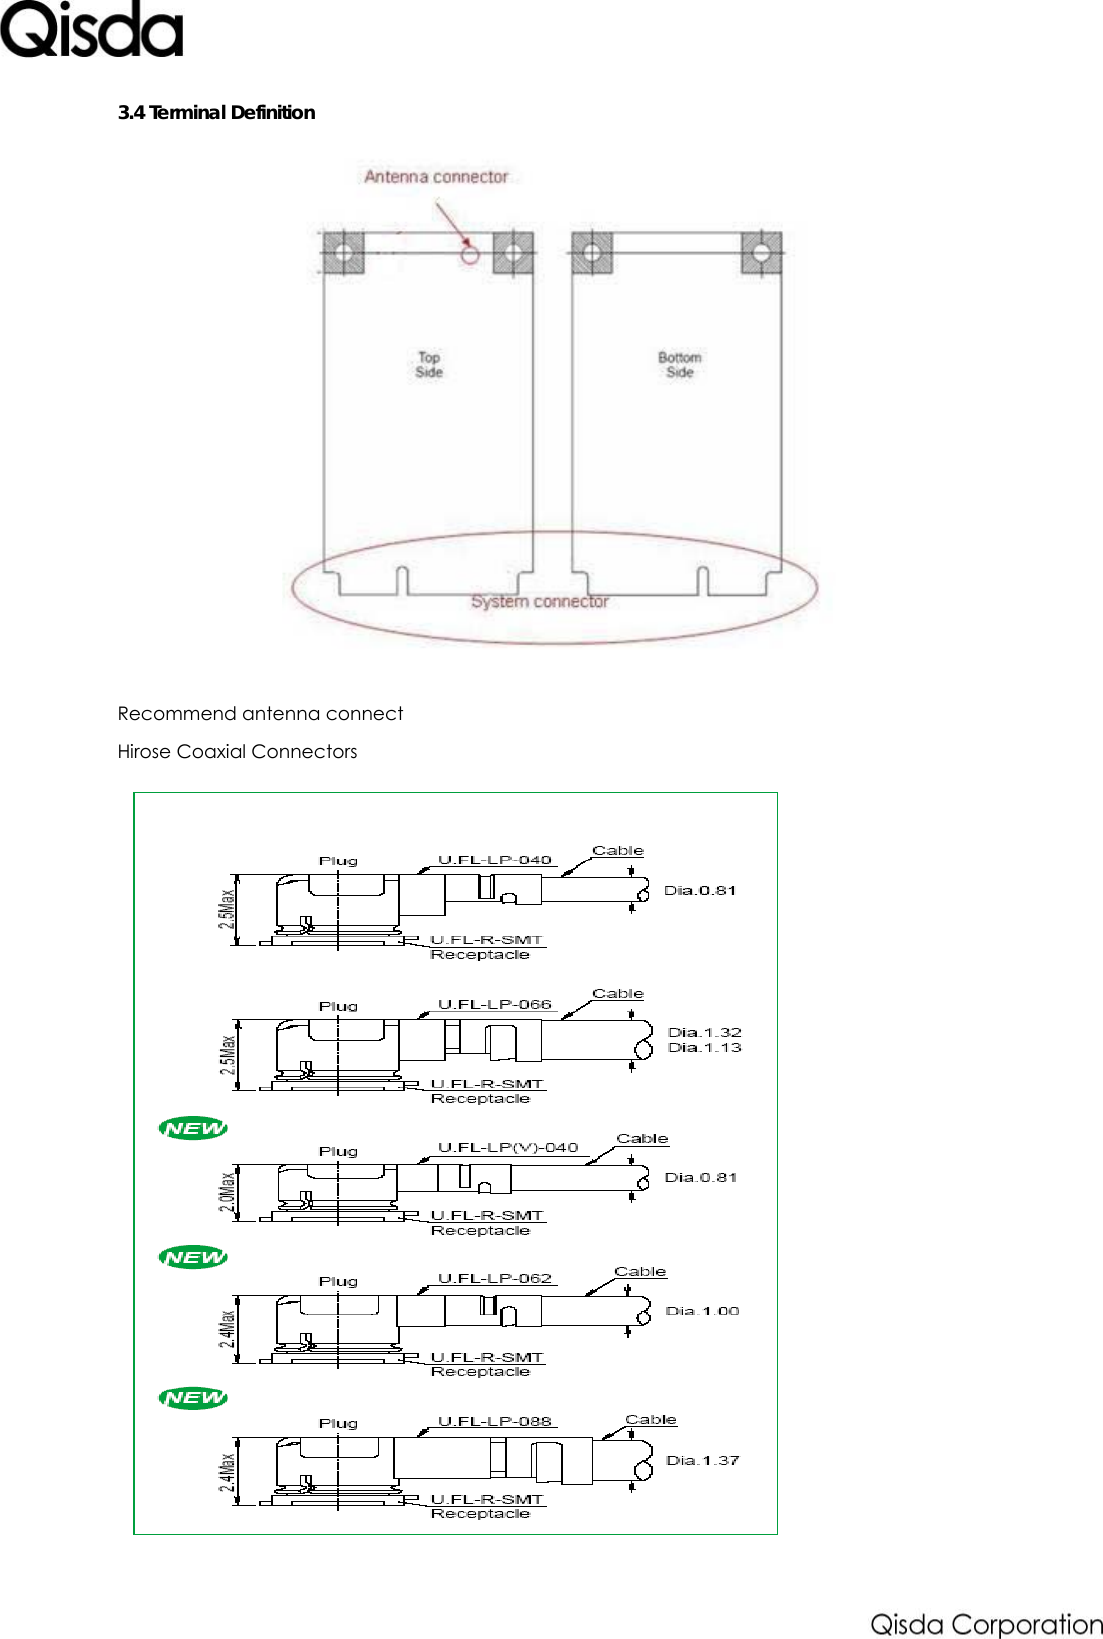   3.4 Terminal Definition  Recommend antenna connect Hirose Coaxial Connectors  